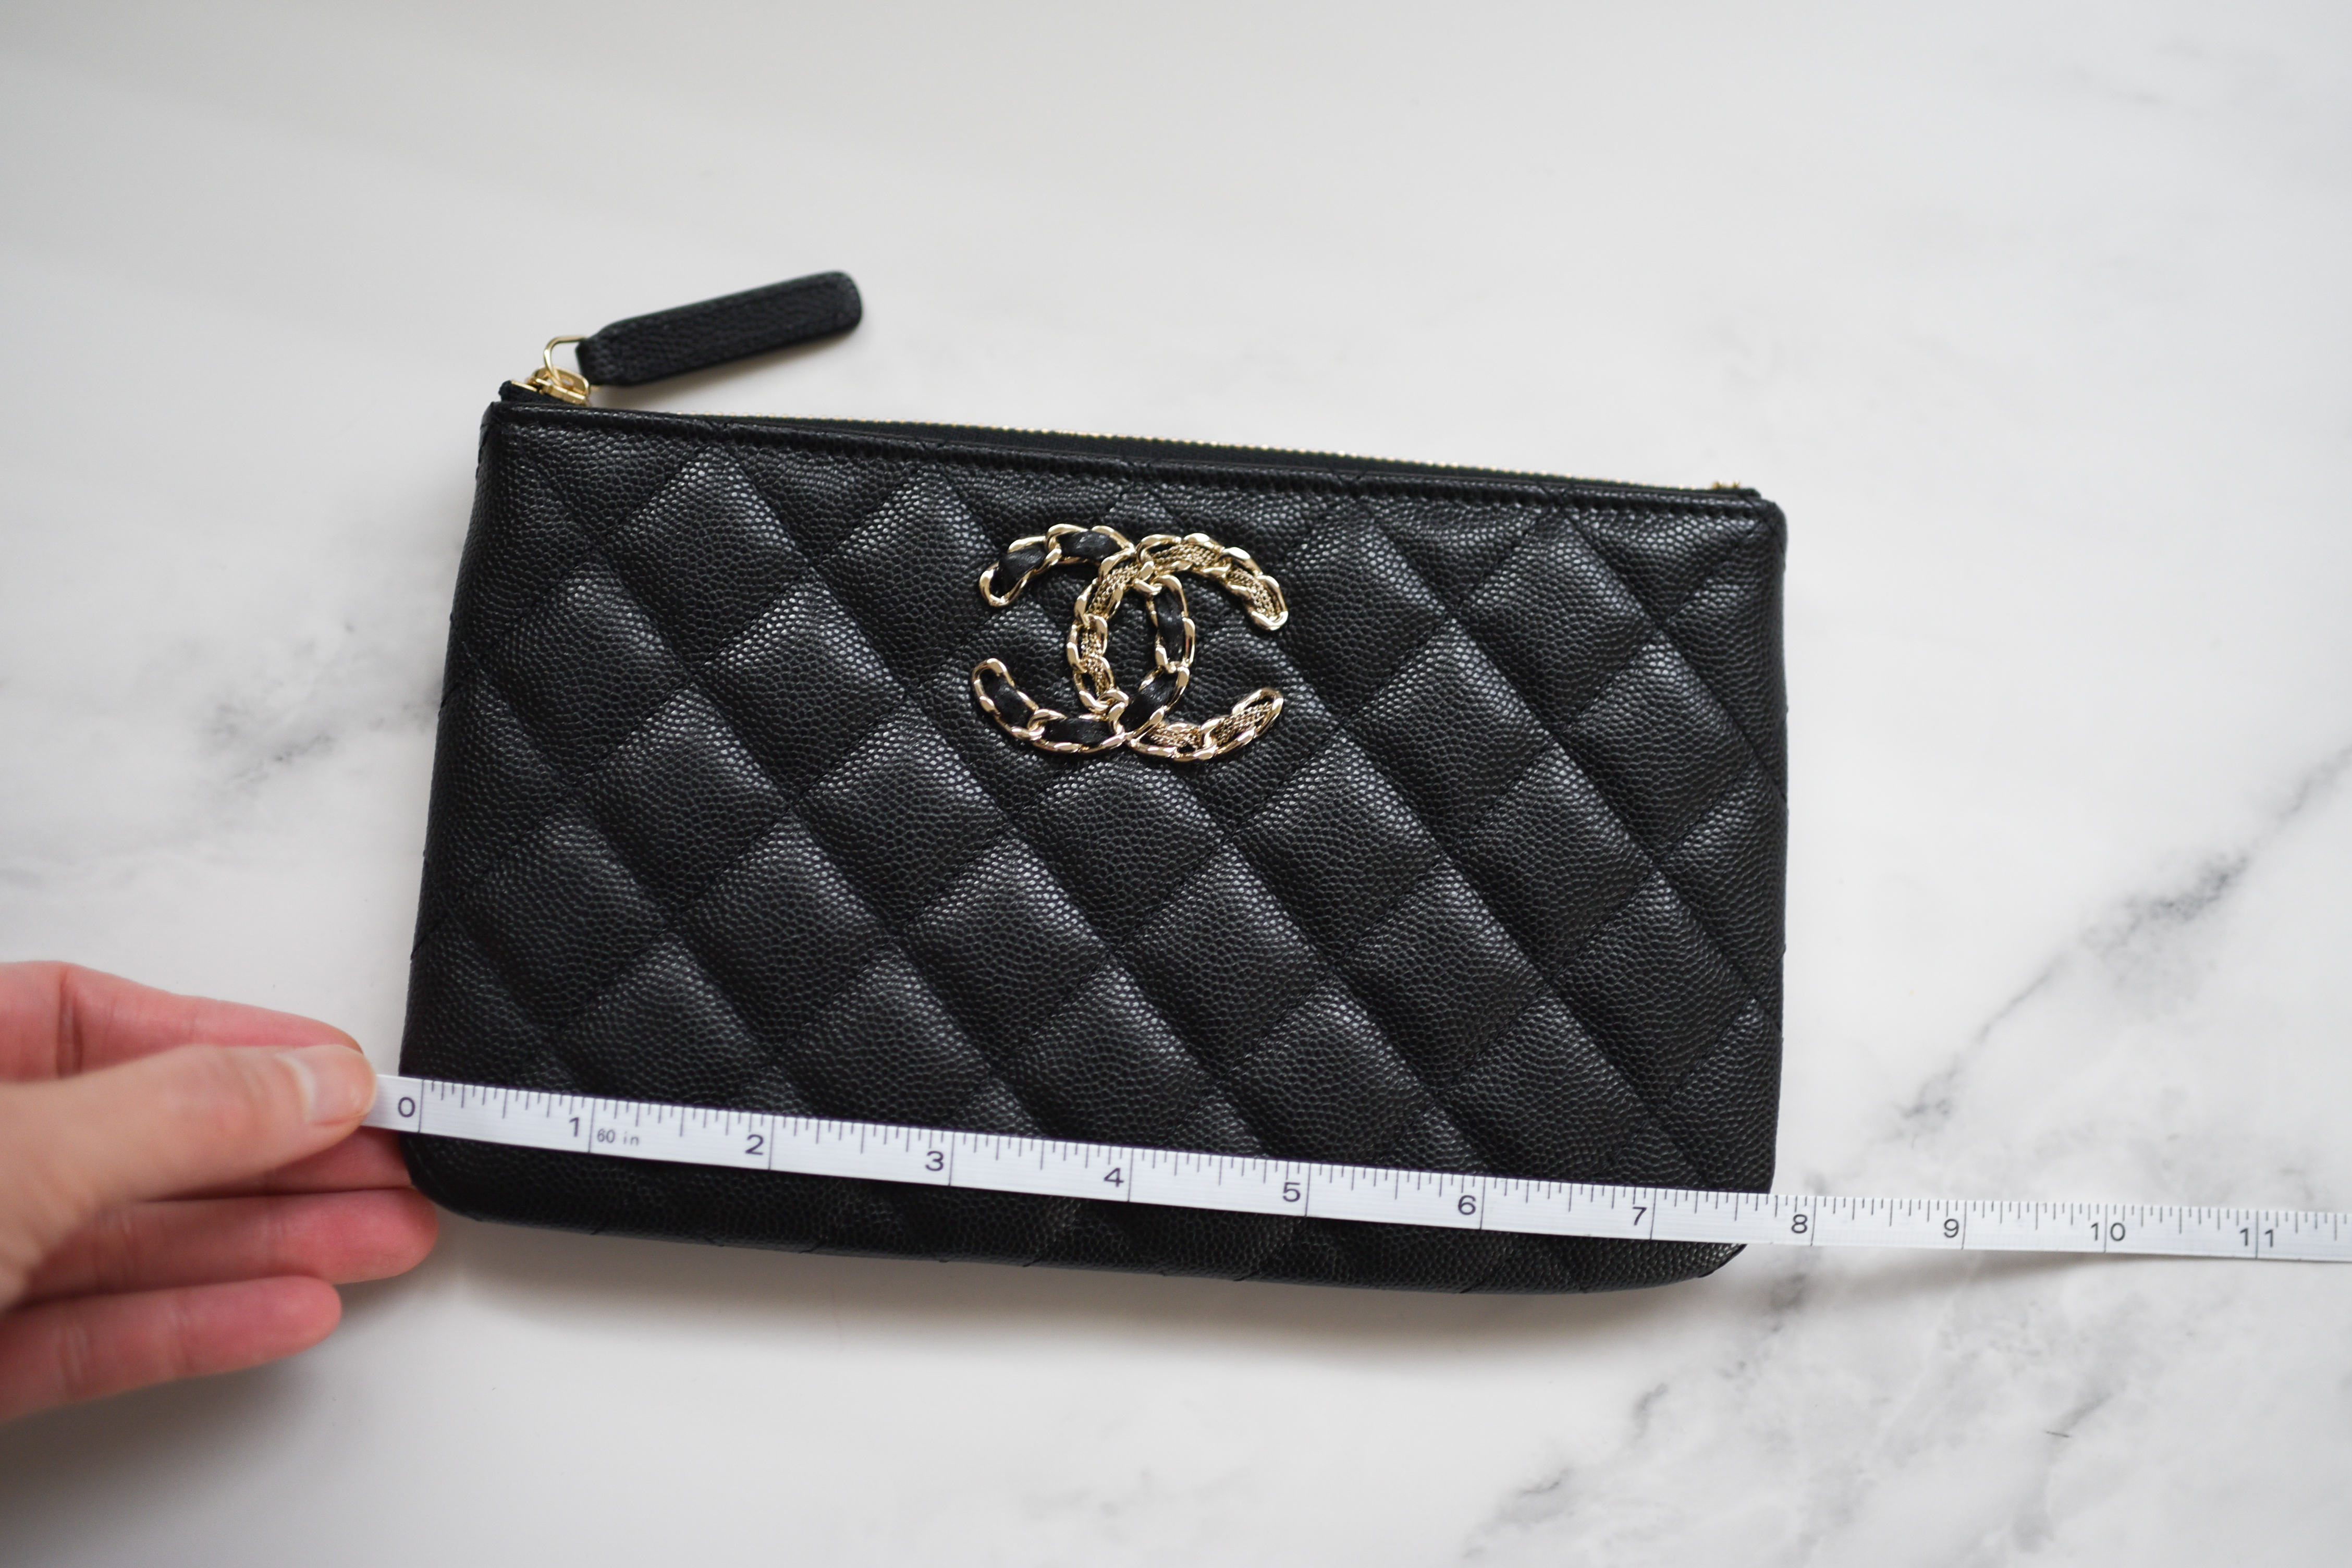 Chanel Small O Case, Black Caviar Leather with Large CC, New in